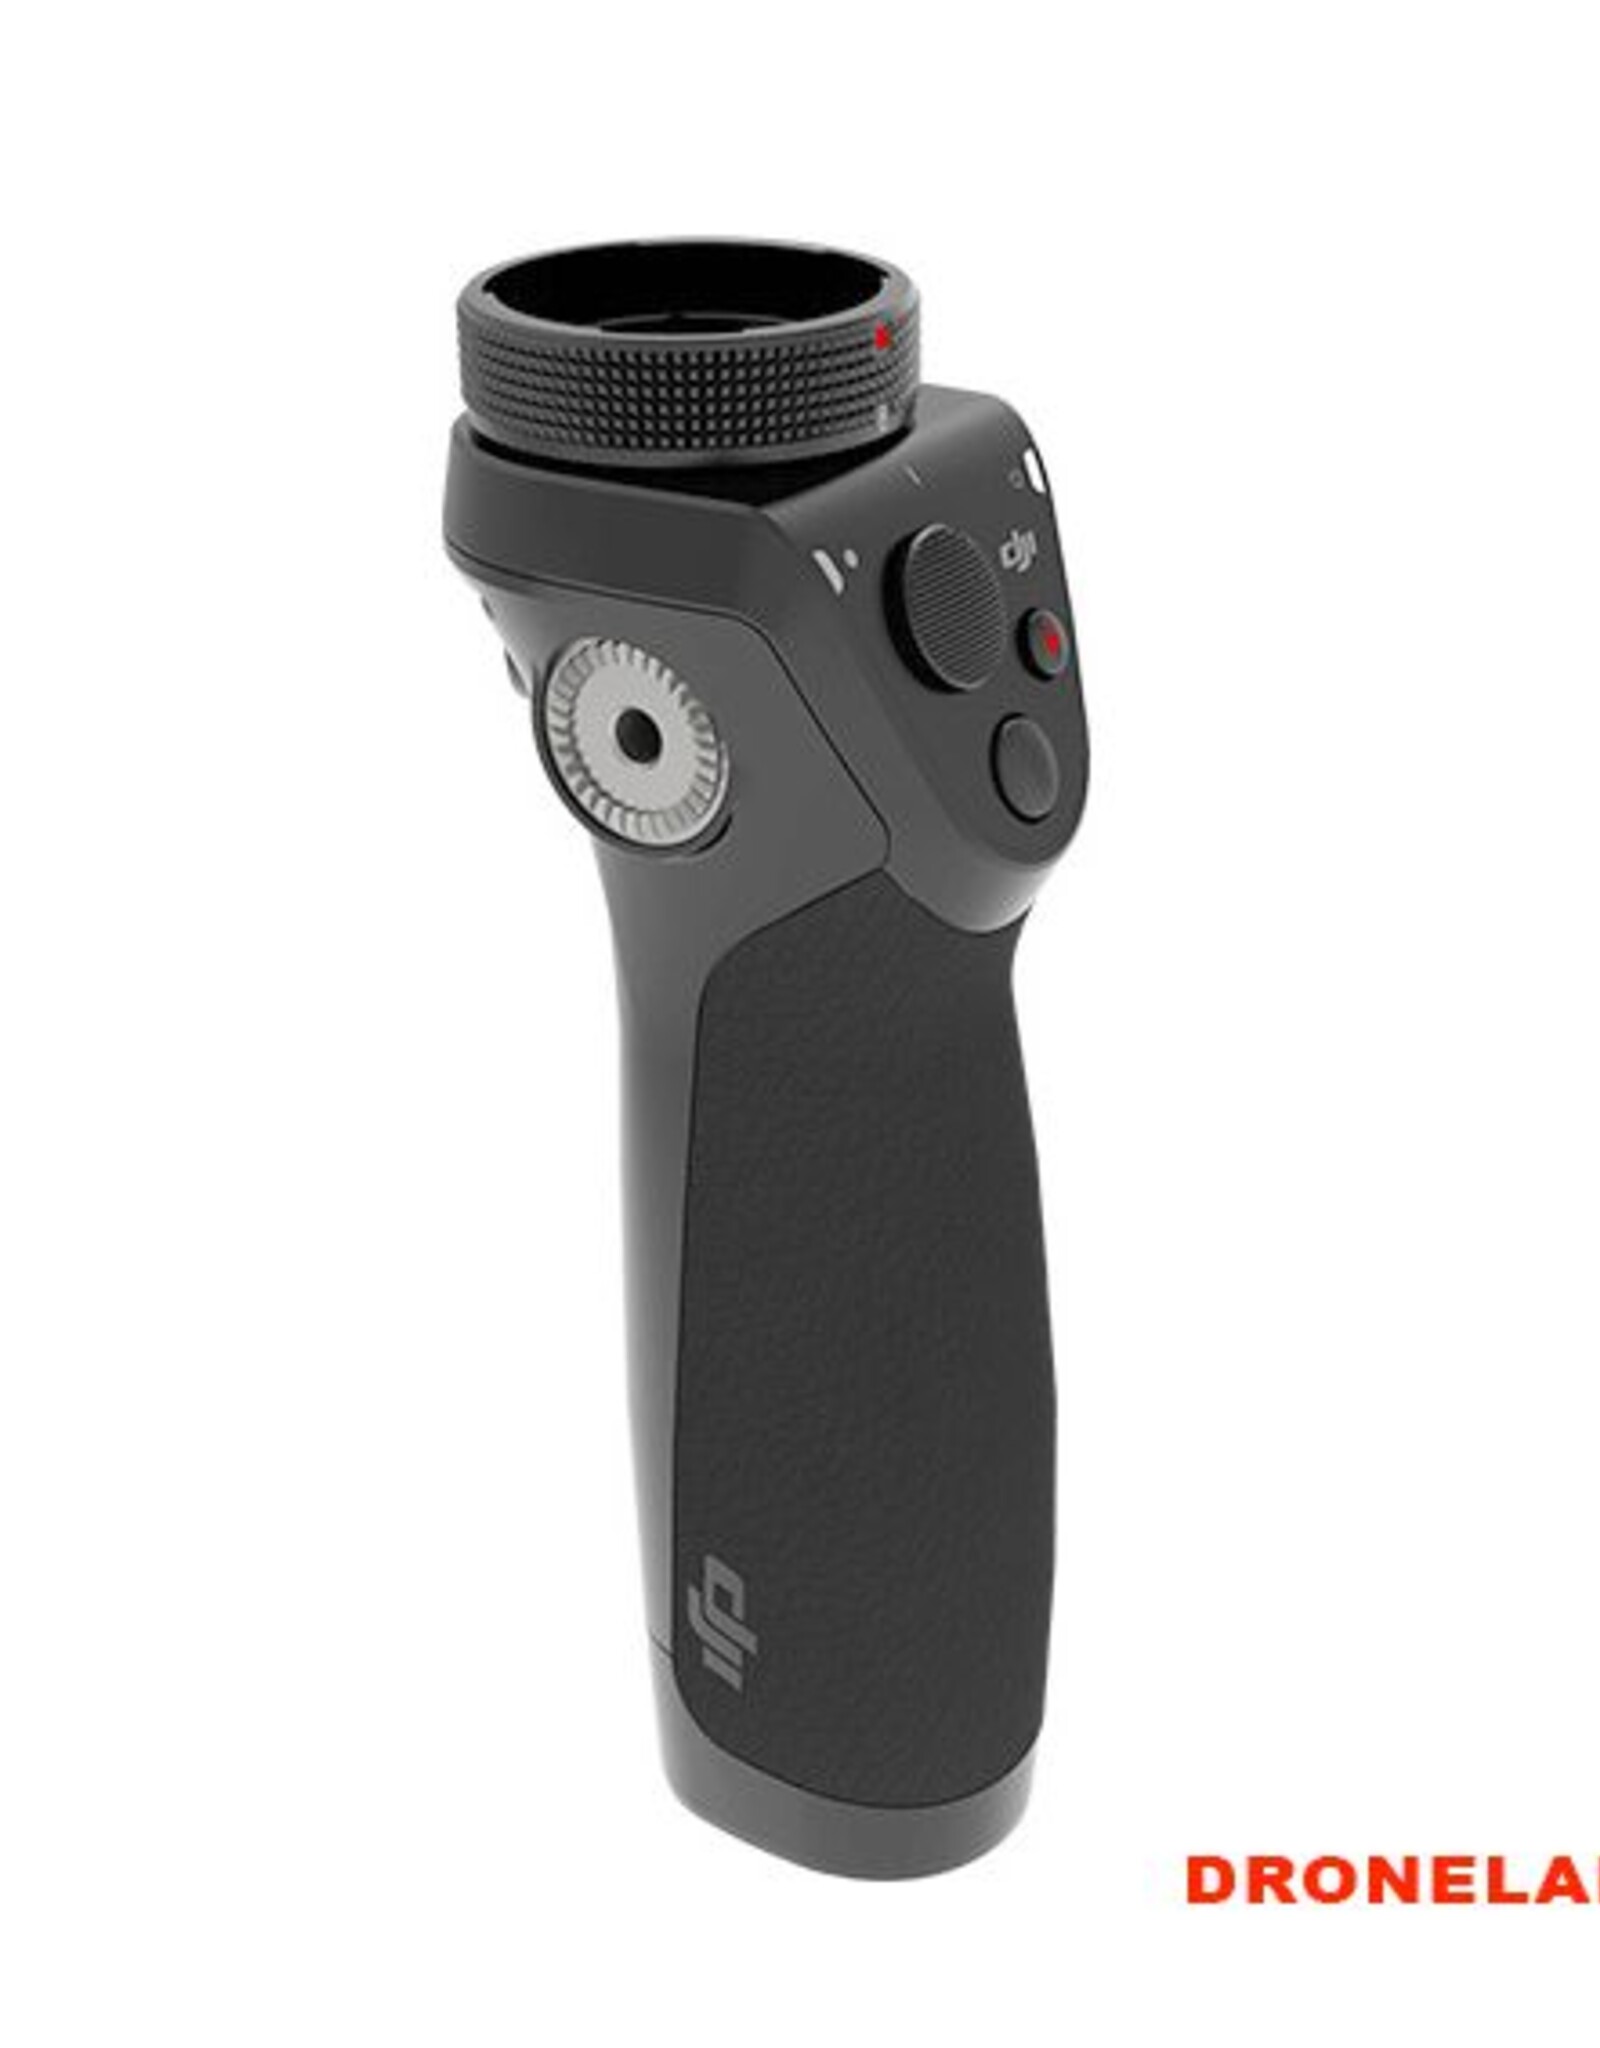 DJI DJI OSMO Handle Kit (Including Intelligent Battery, Charger and Phone Holder. Gimbal and Camera excluded.)